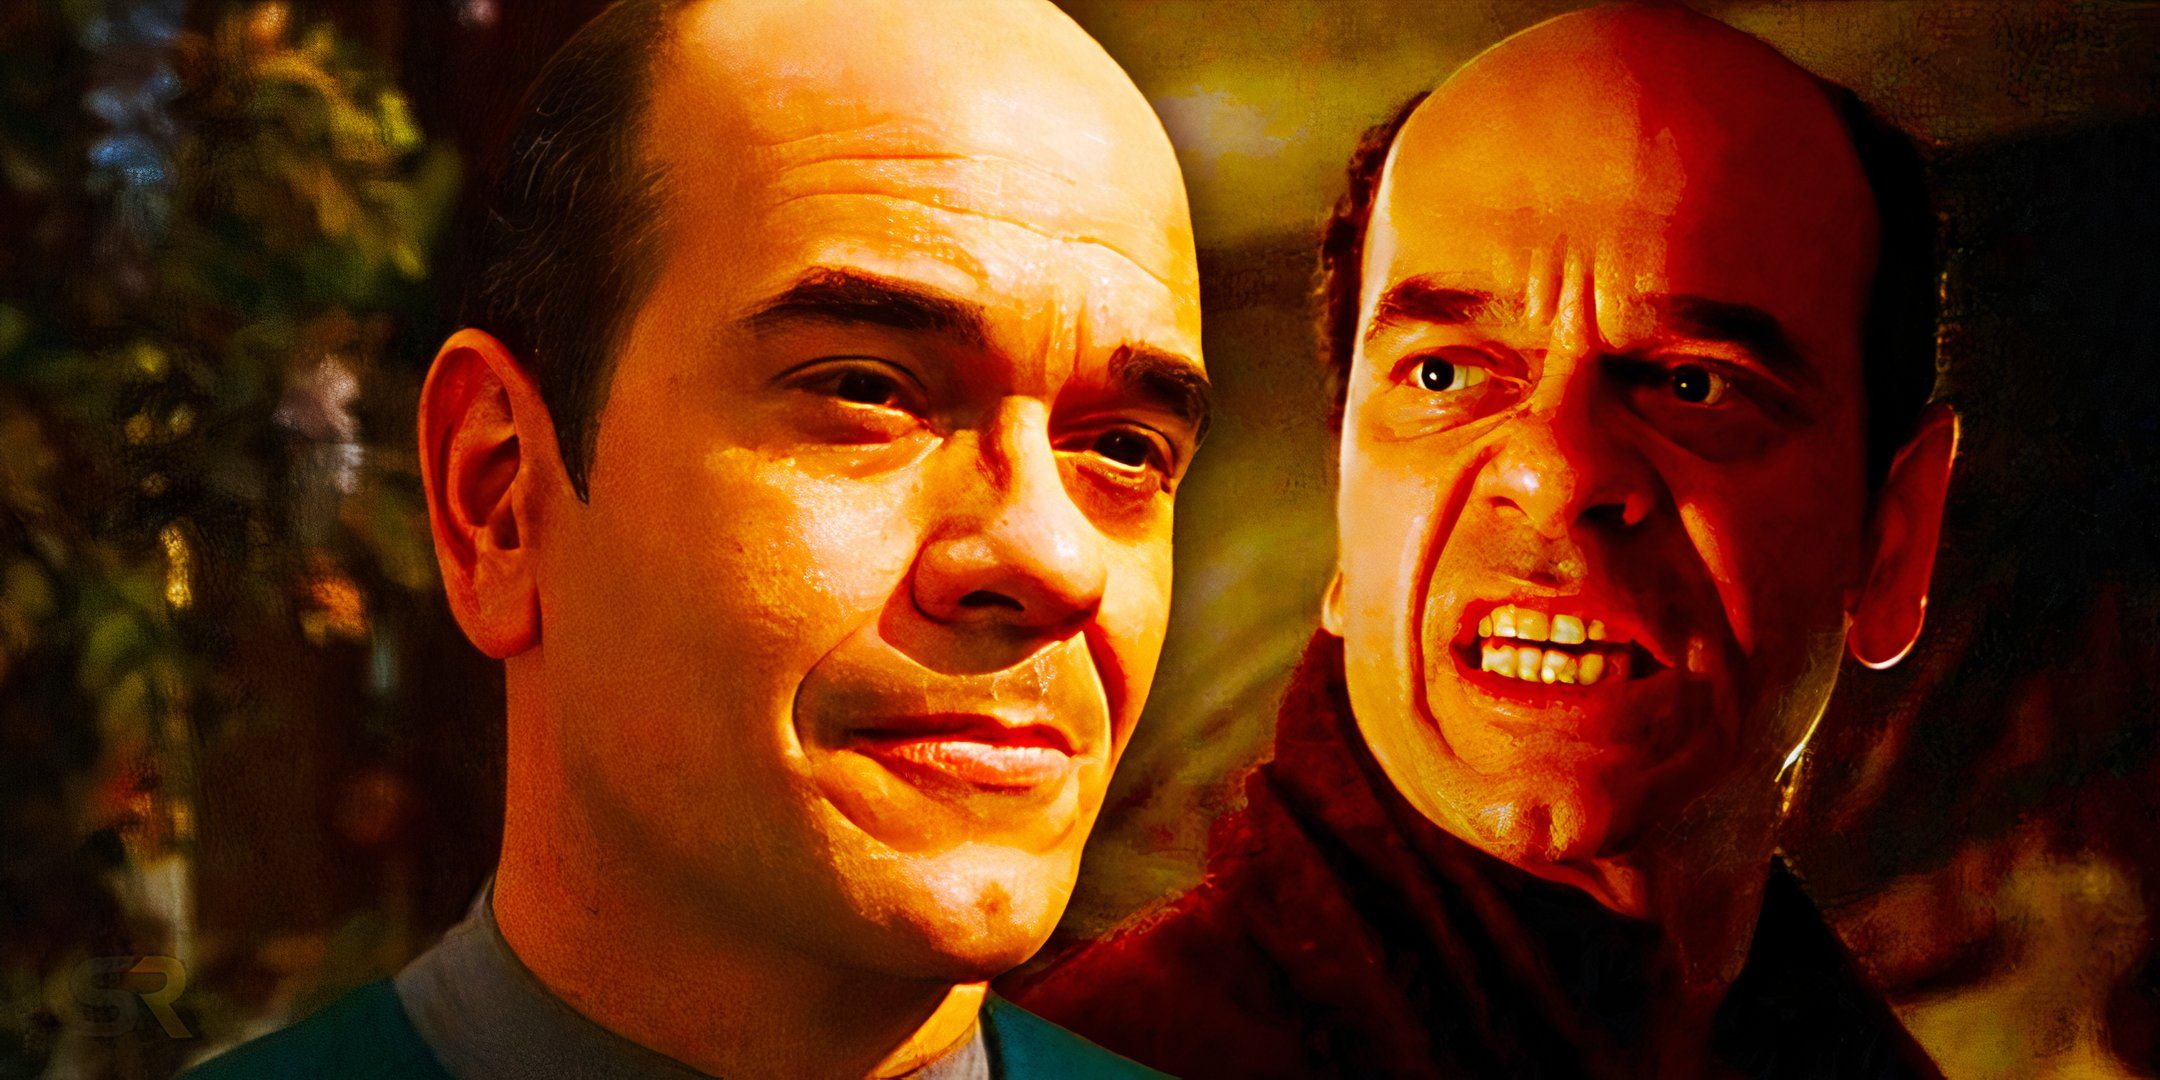 Collage of the Doctor (Robert Picardo) from Star Trek: Voyager with an image of his dark alter-ego from the episode 